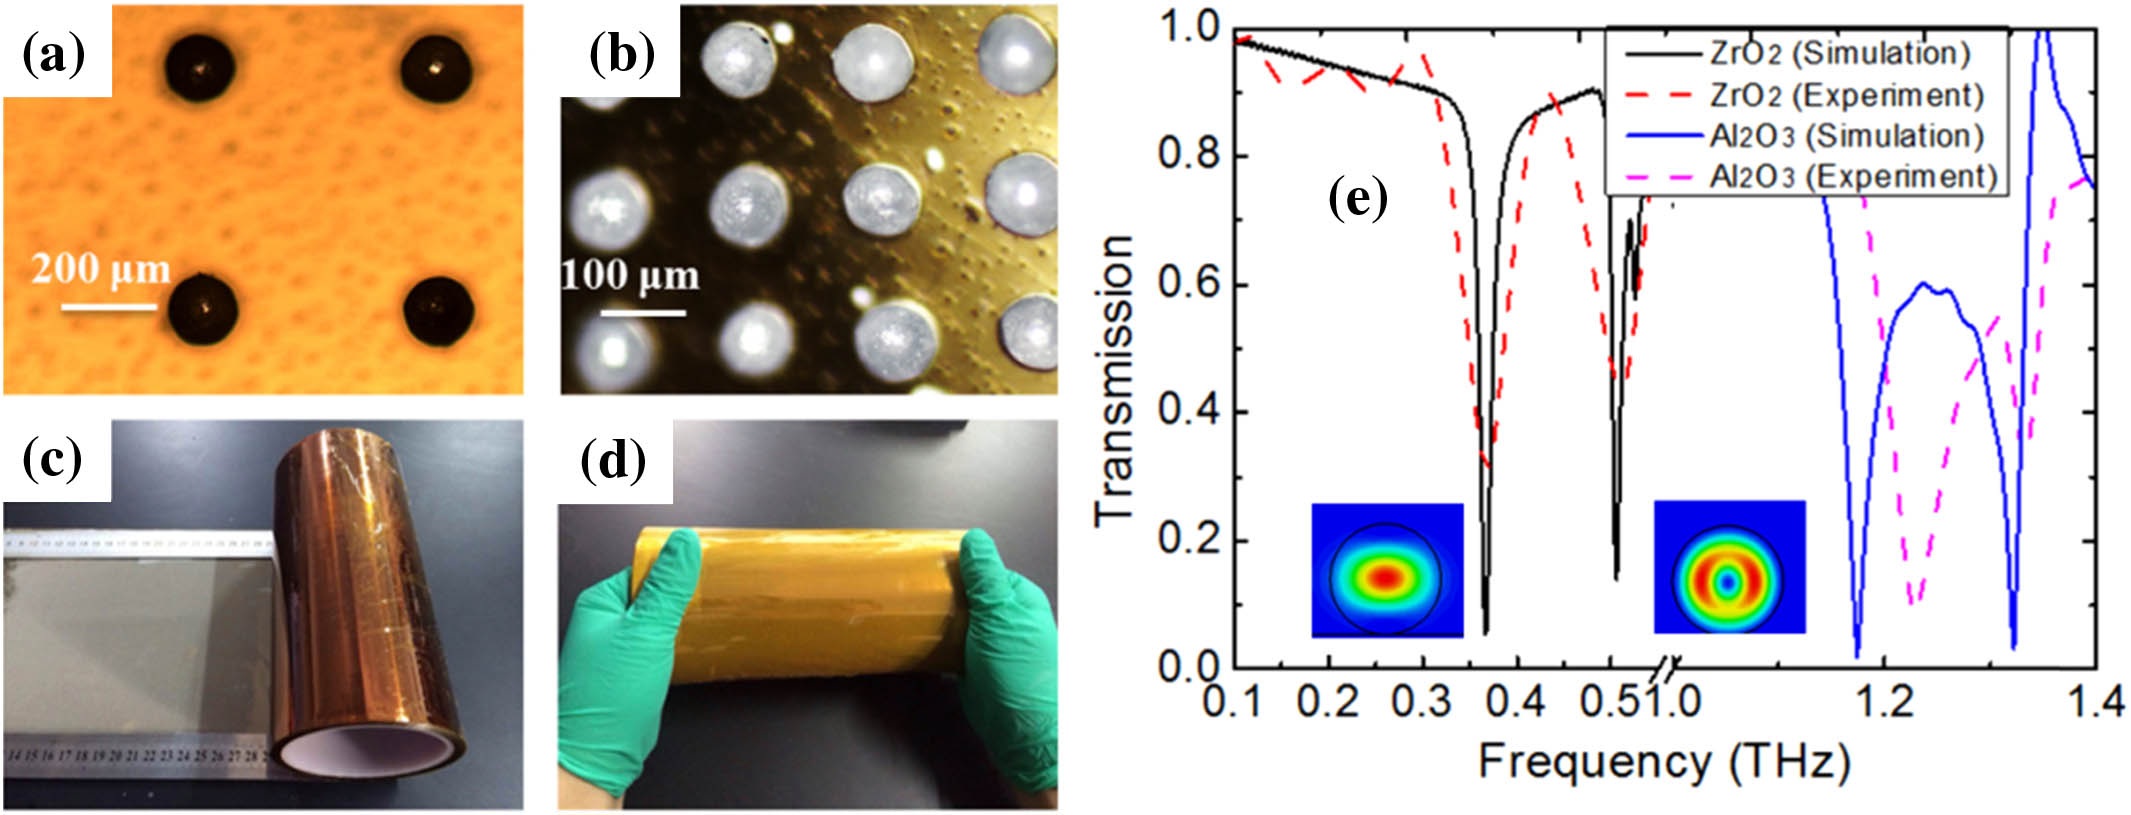 Microscope images of the fabricated (a) ZrO2 and (b) Al2O3 all-dielectric metamaterials. Photographs of (c) the fabrication process and (d) the fabricated ultra-large-scale flexible all-dielectric metamaterial using the MTAS method. (e) Simulated and measured transmissions for ZrO2 and Al2O3 all-dielectric metamaterials. The insets are simulated magnetic field intensity distributions at the corresponding resonance dips in the H–k plane.